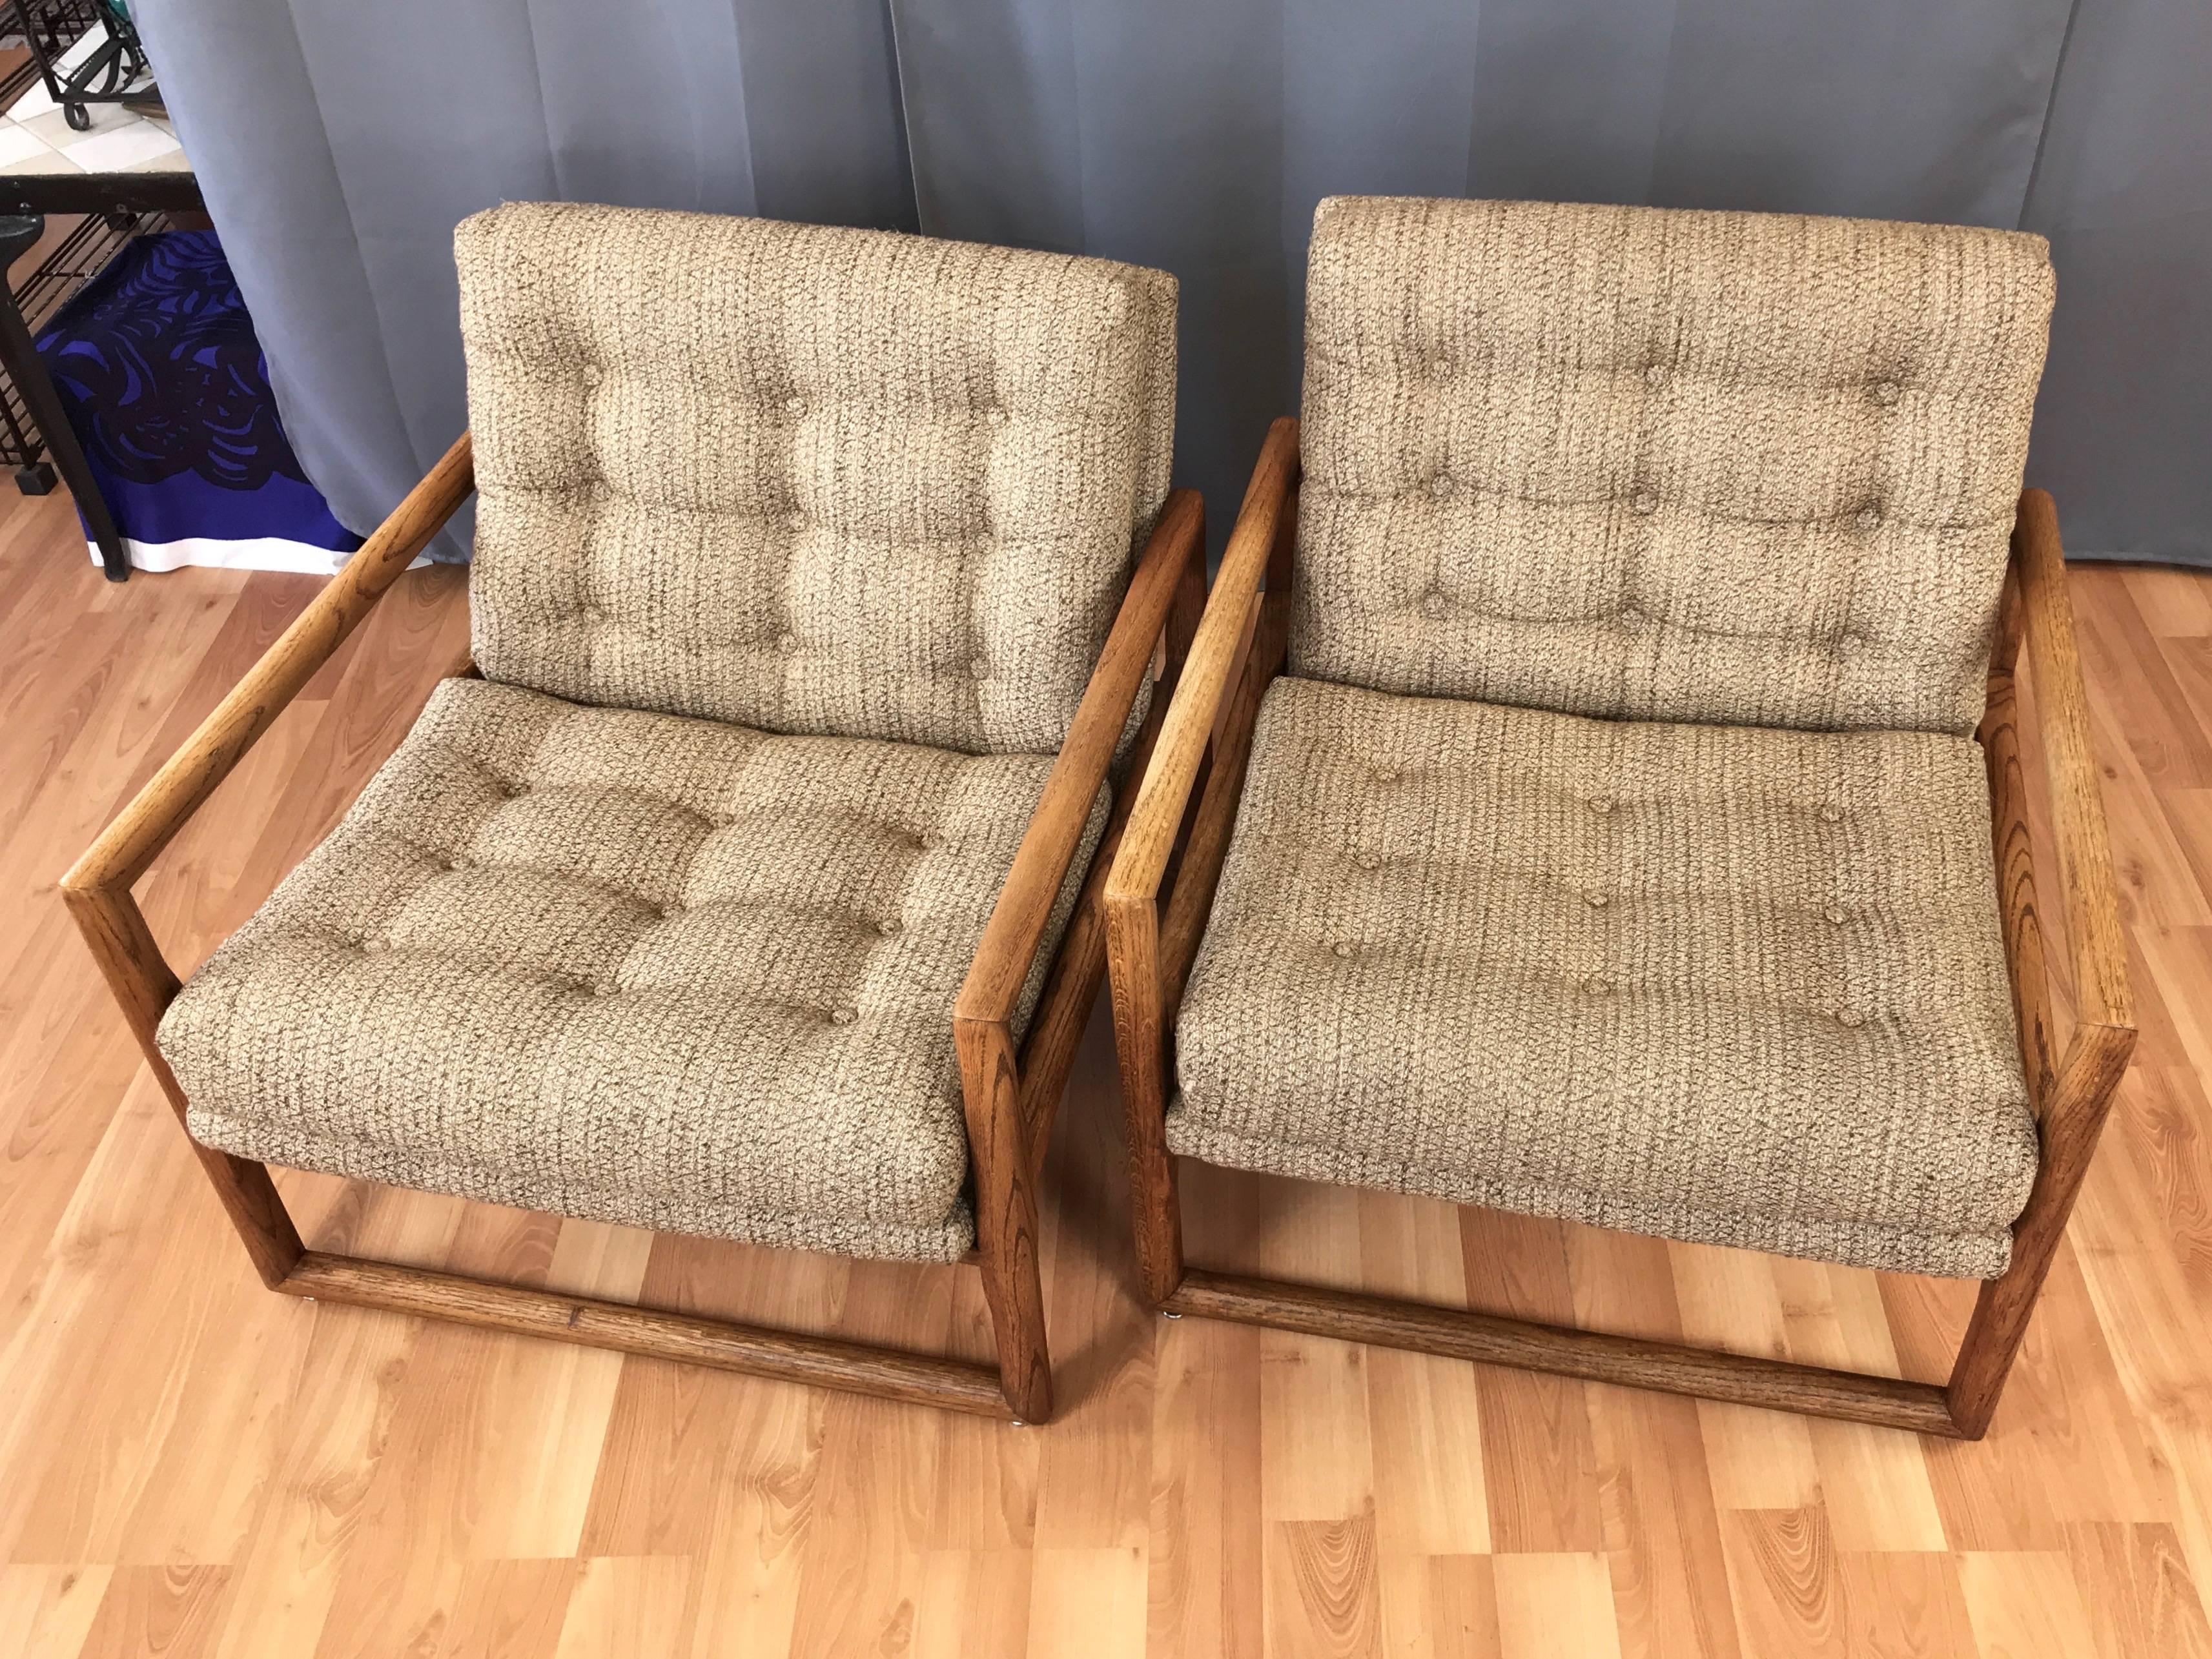 Late 20th Century Pair of Milo Baughman for Thayer Coggin Oak “Scoop” Lounge Chairs